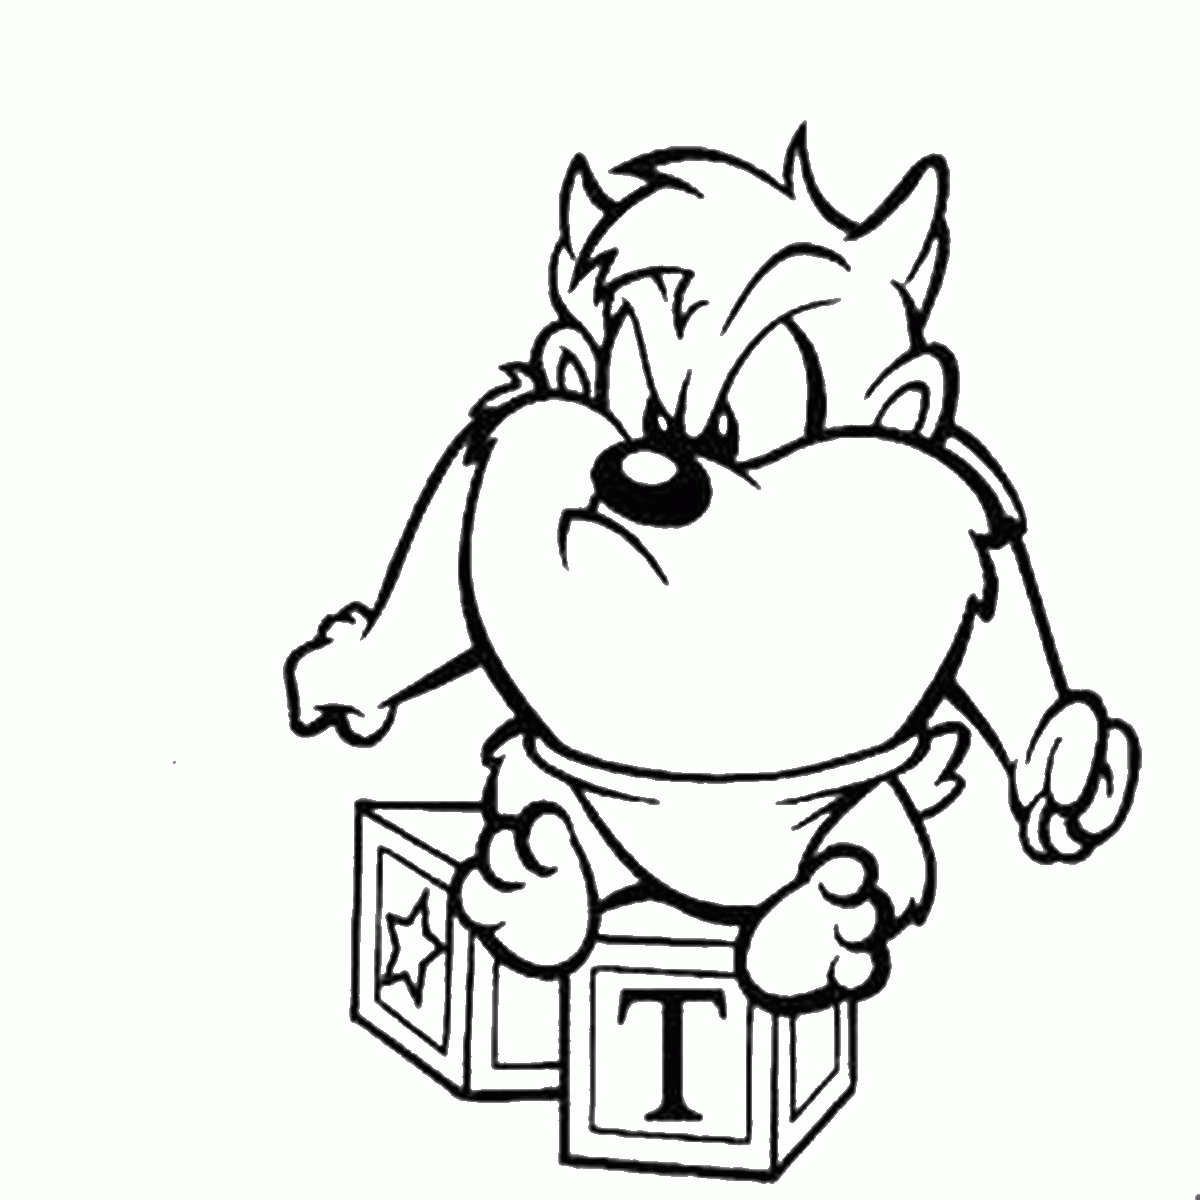 Taz-Mania Coloring Pages